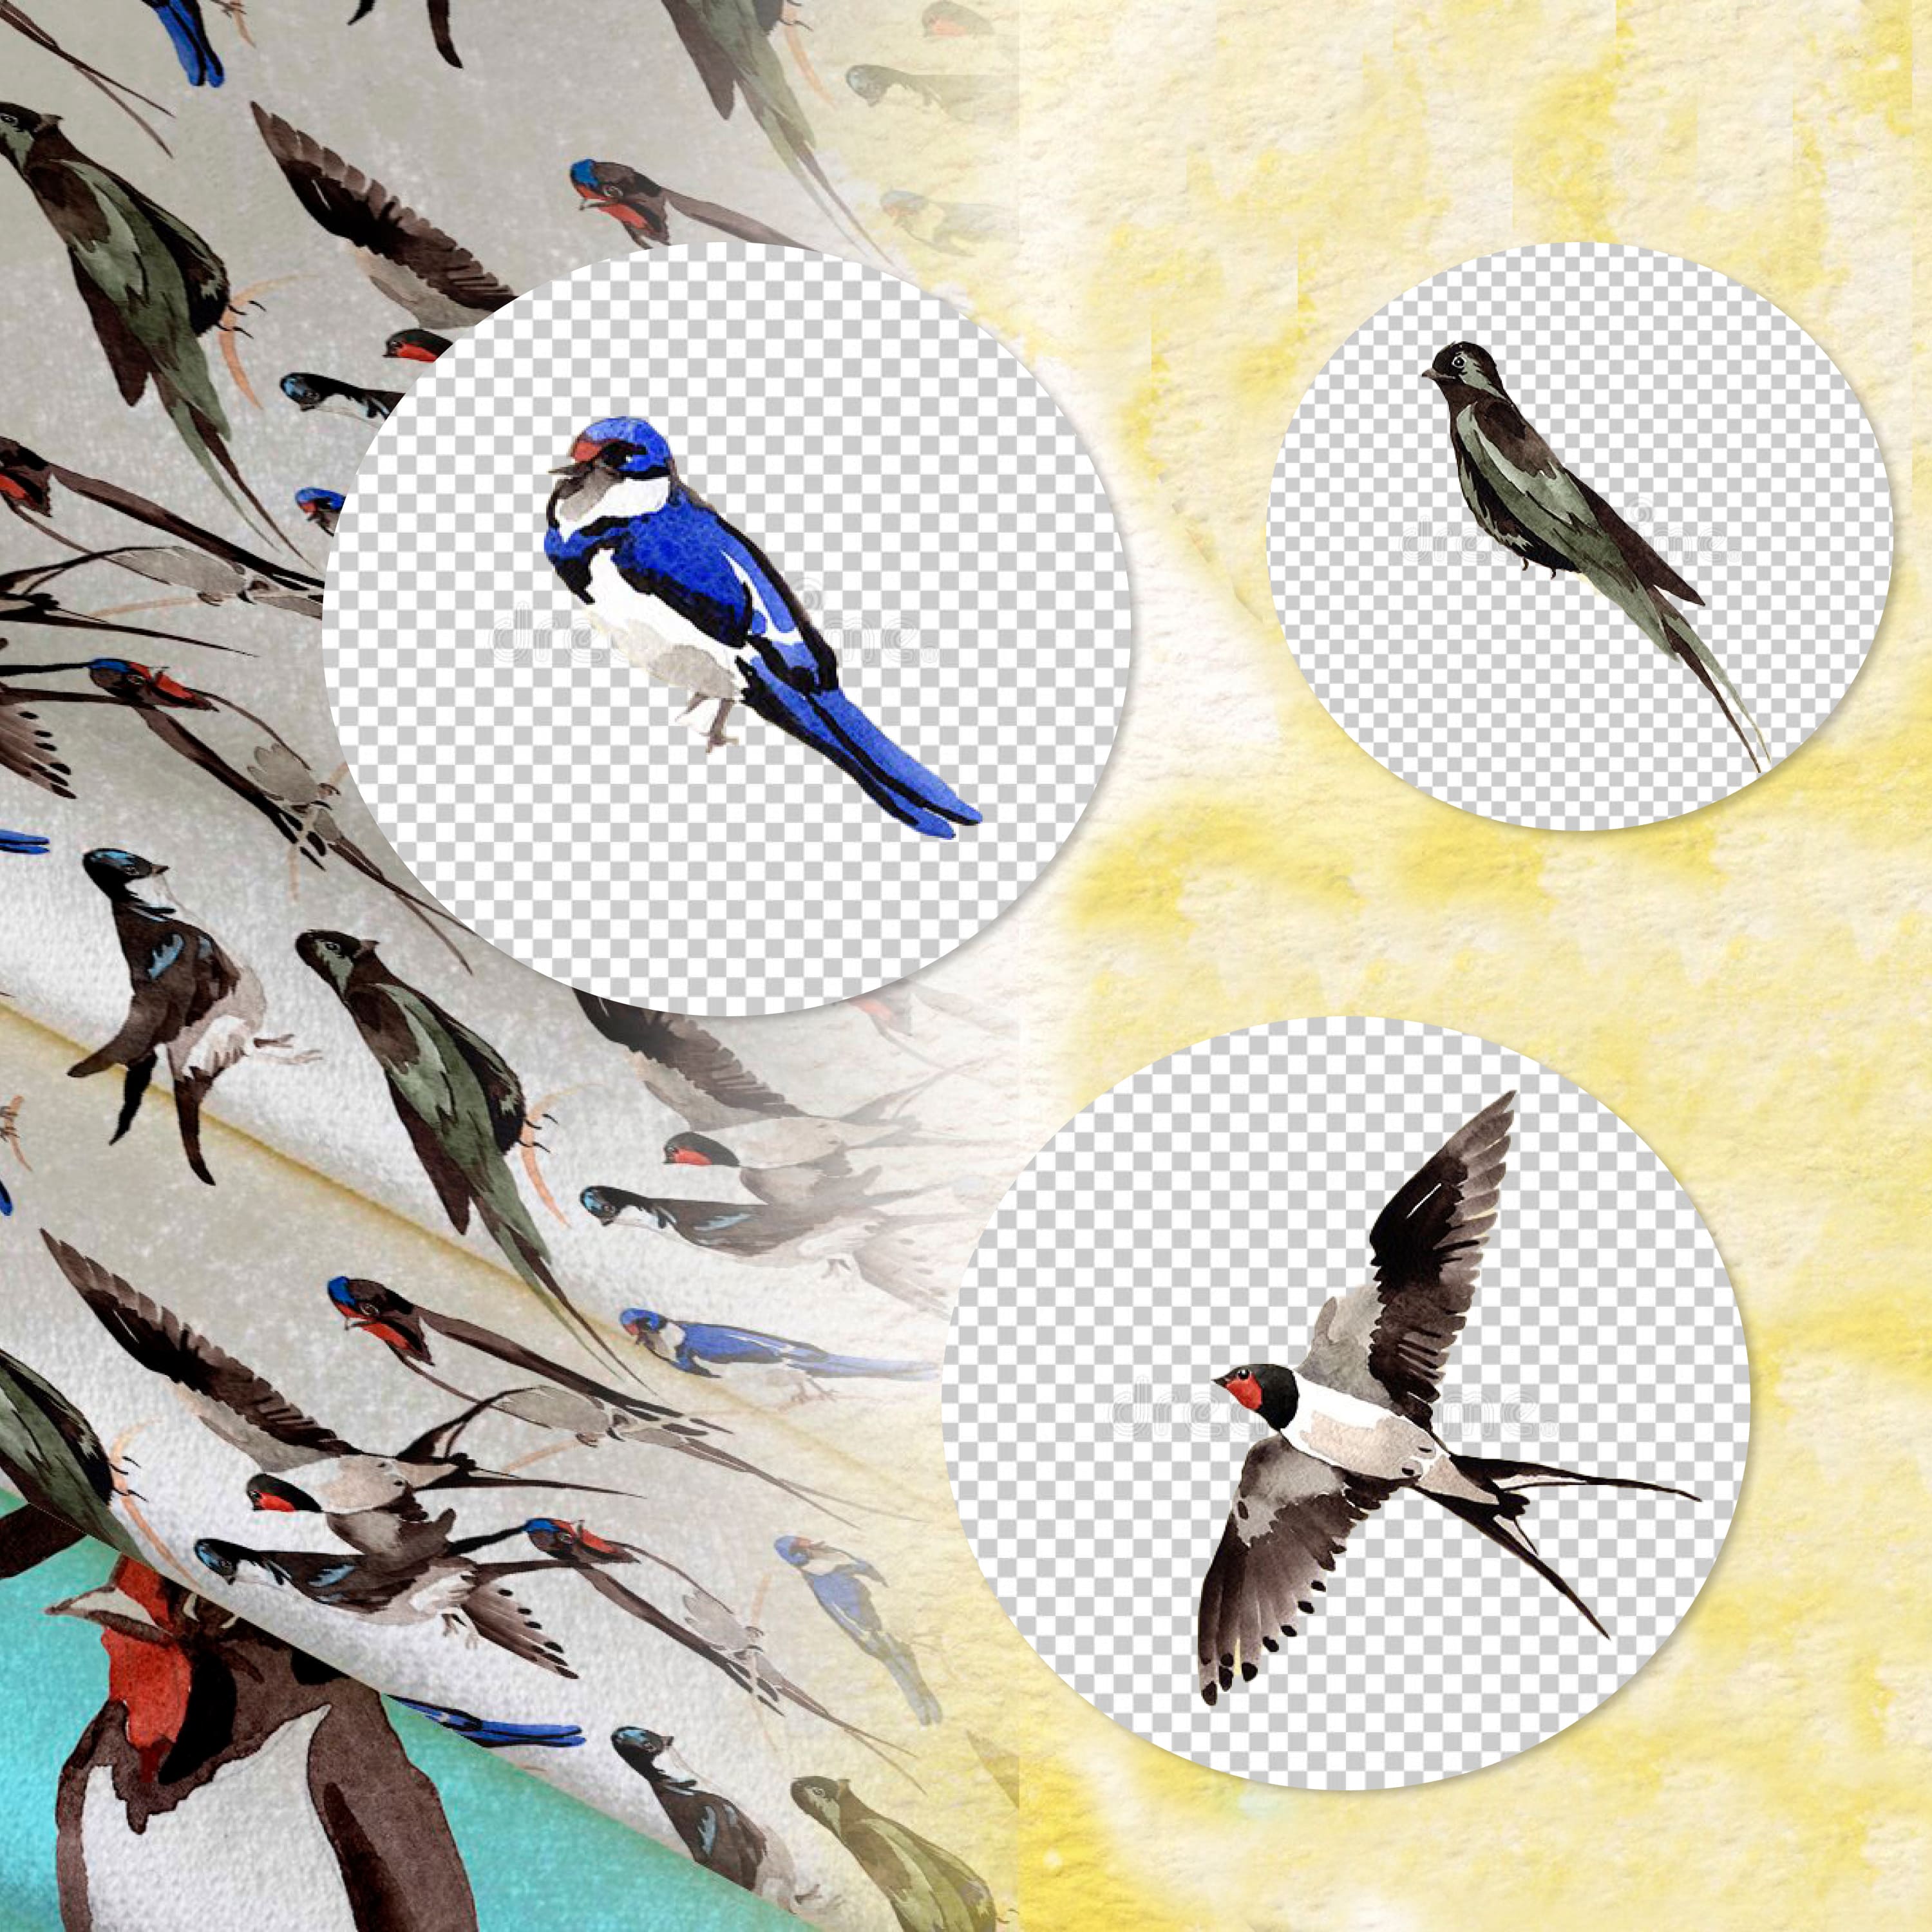 Different versions of swallows watercolor printed elements.